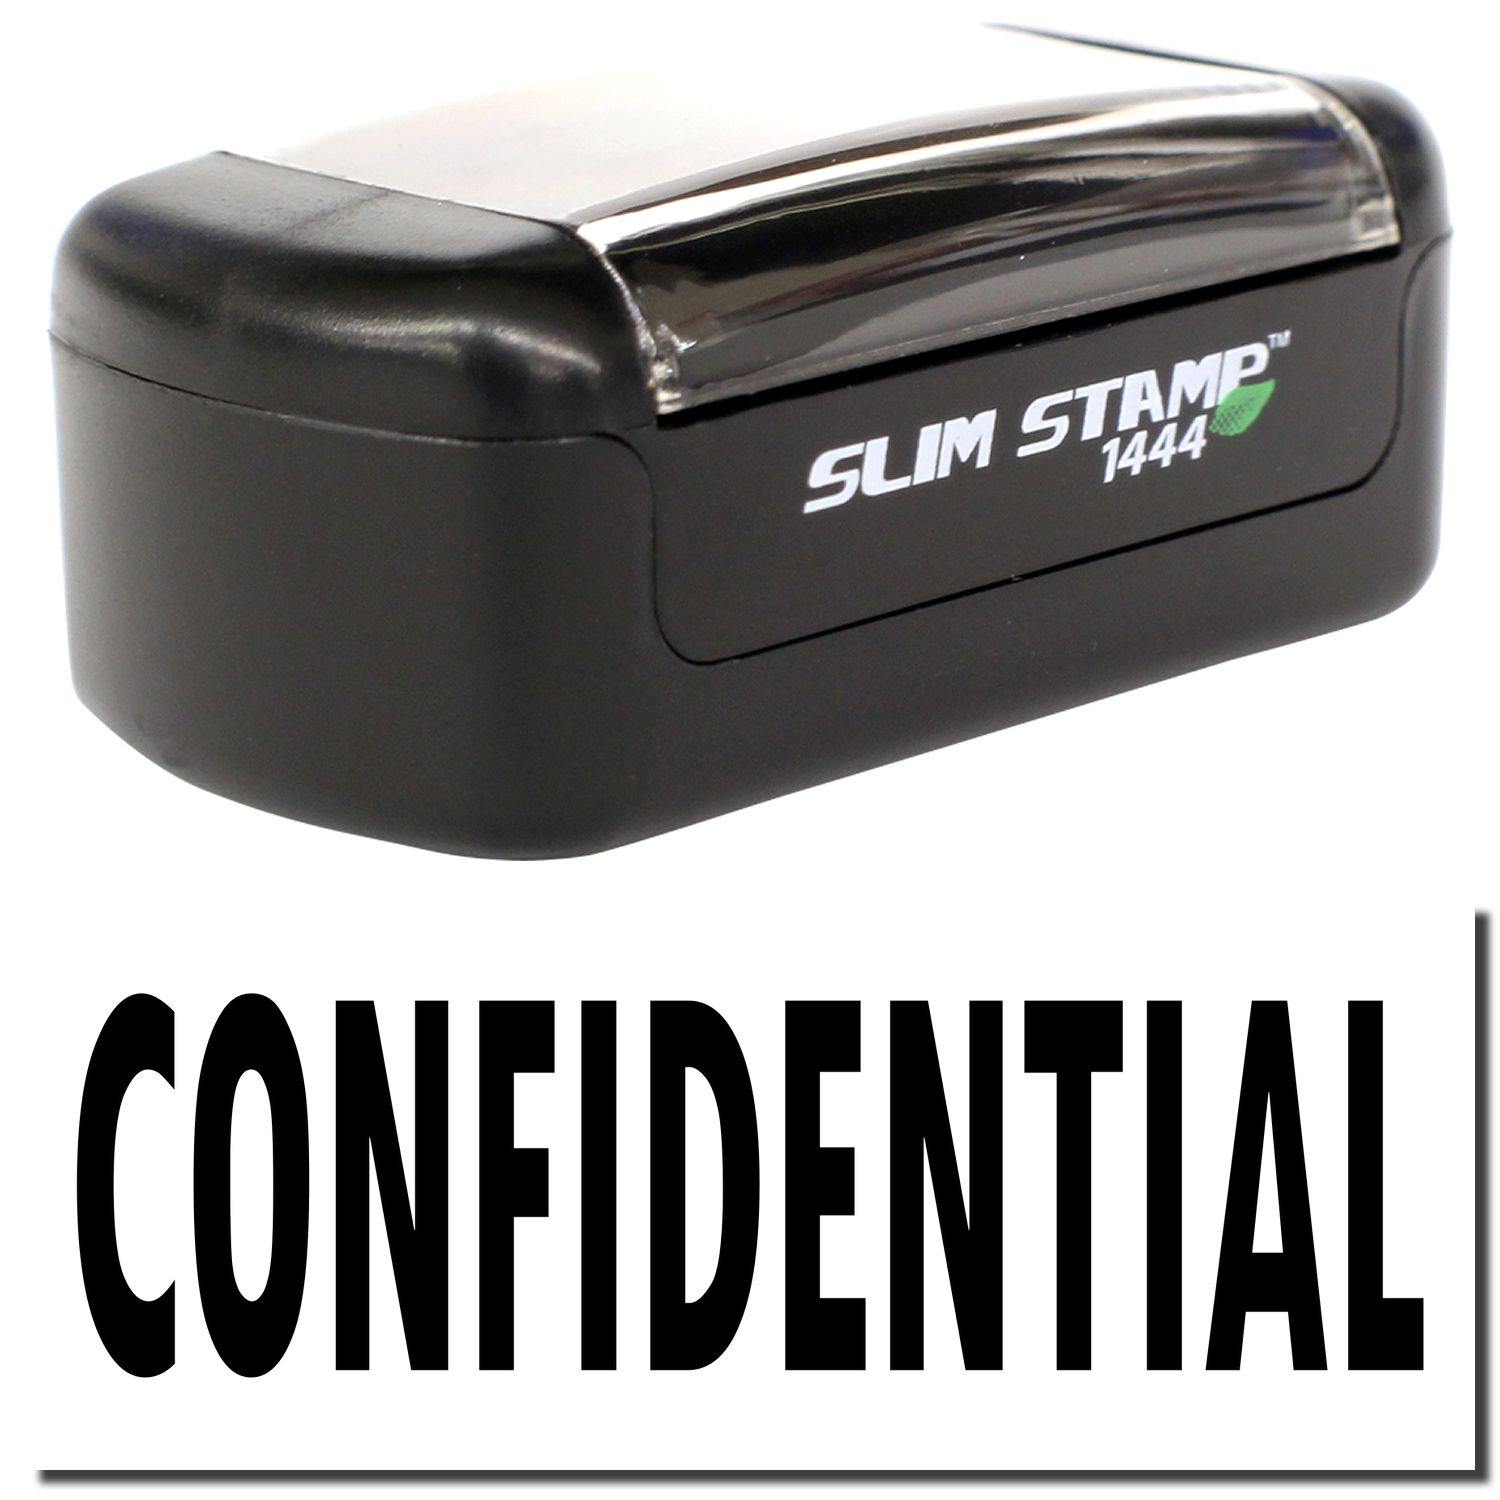 A stock office pre-inked stamp with a stamped image showing how the text "CONFIDENTIAL" is displayed after stamping.